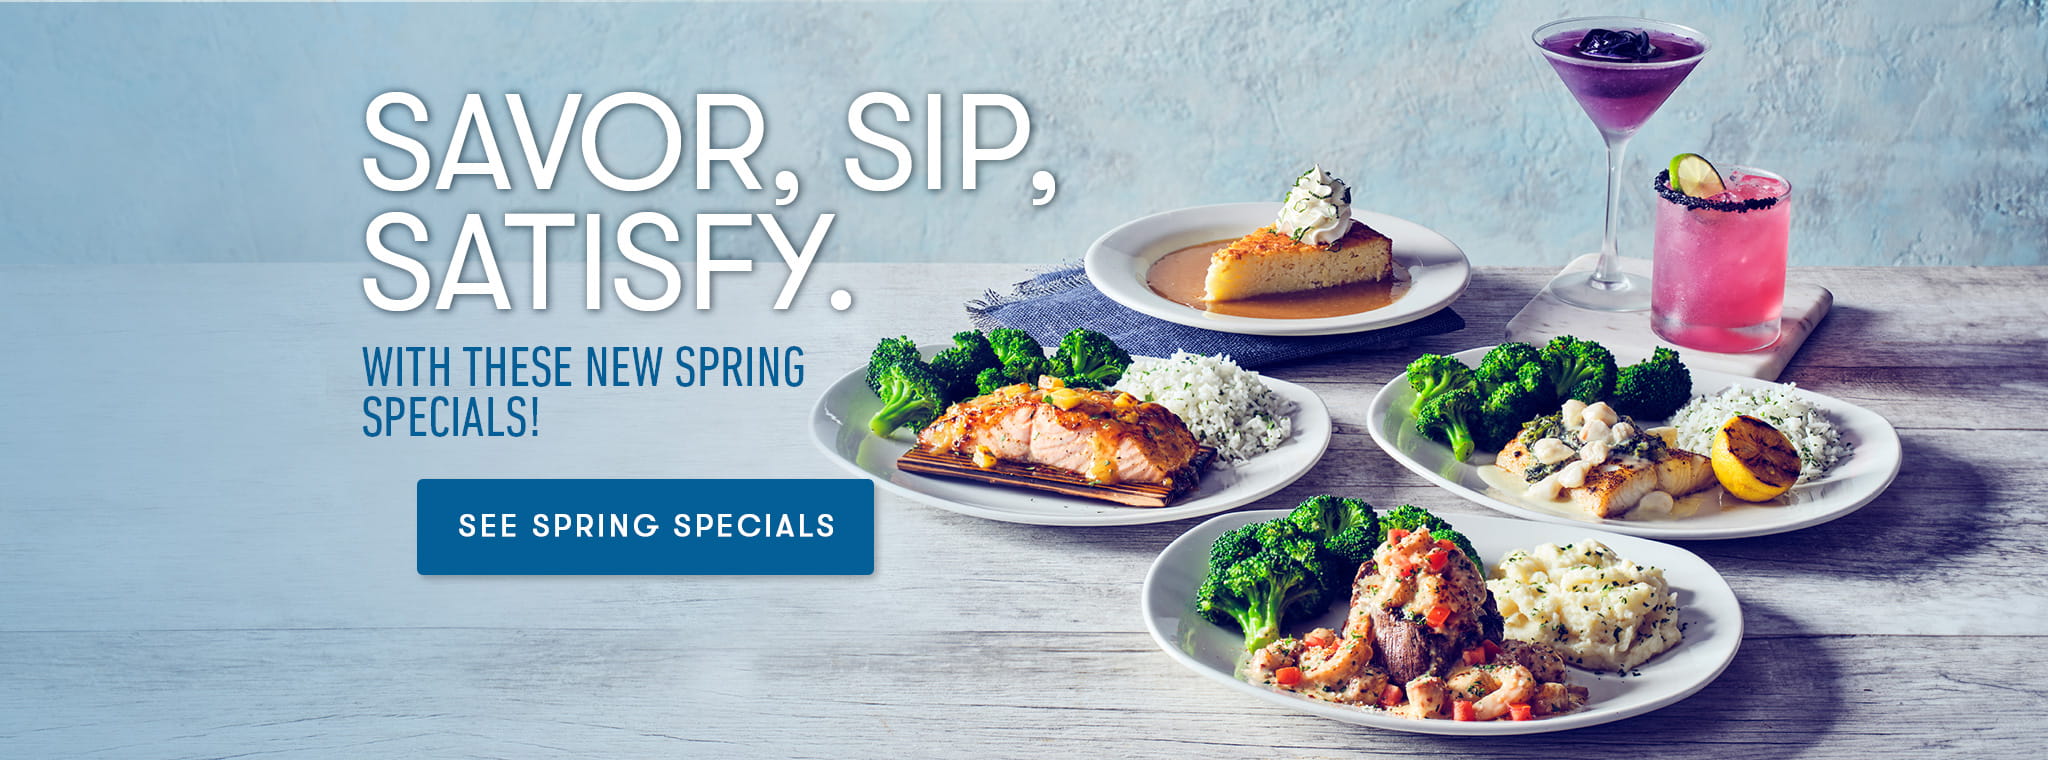 Savor, Sip, Satisfy. With these new spring specials